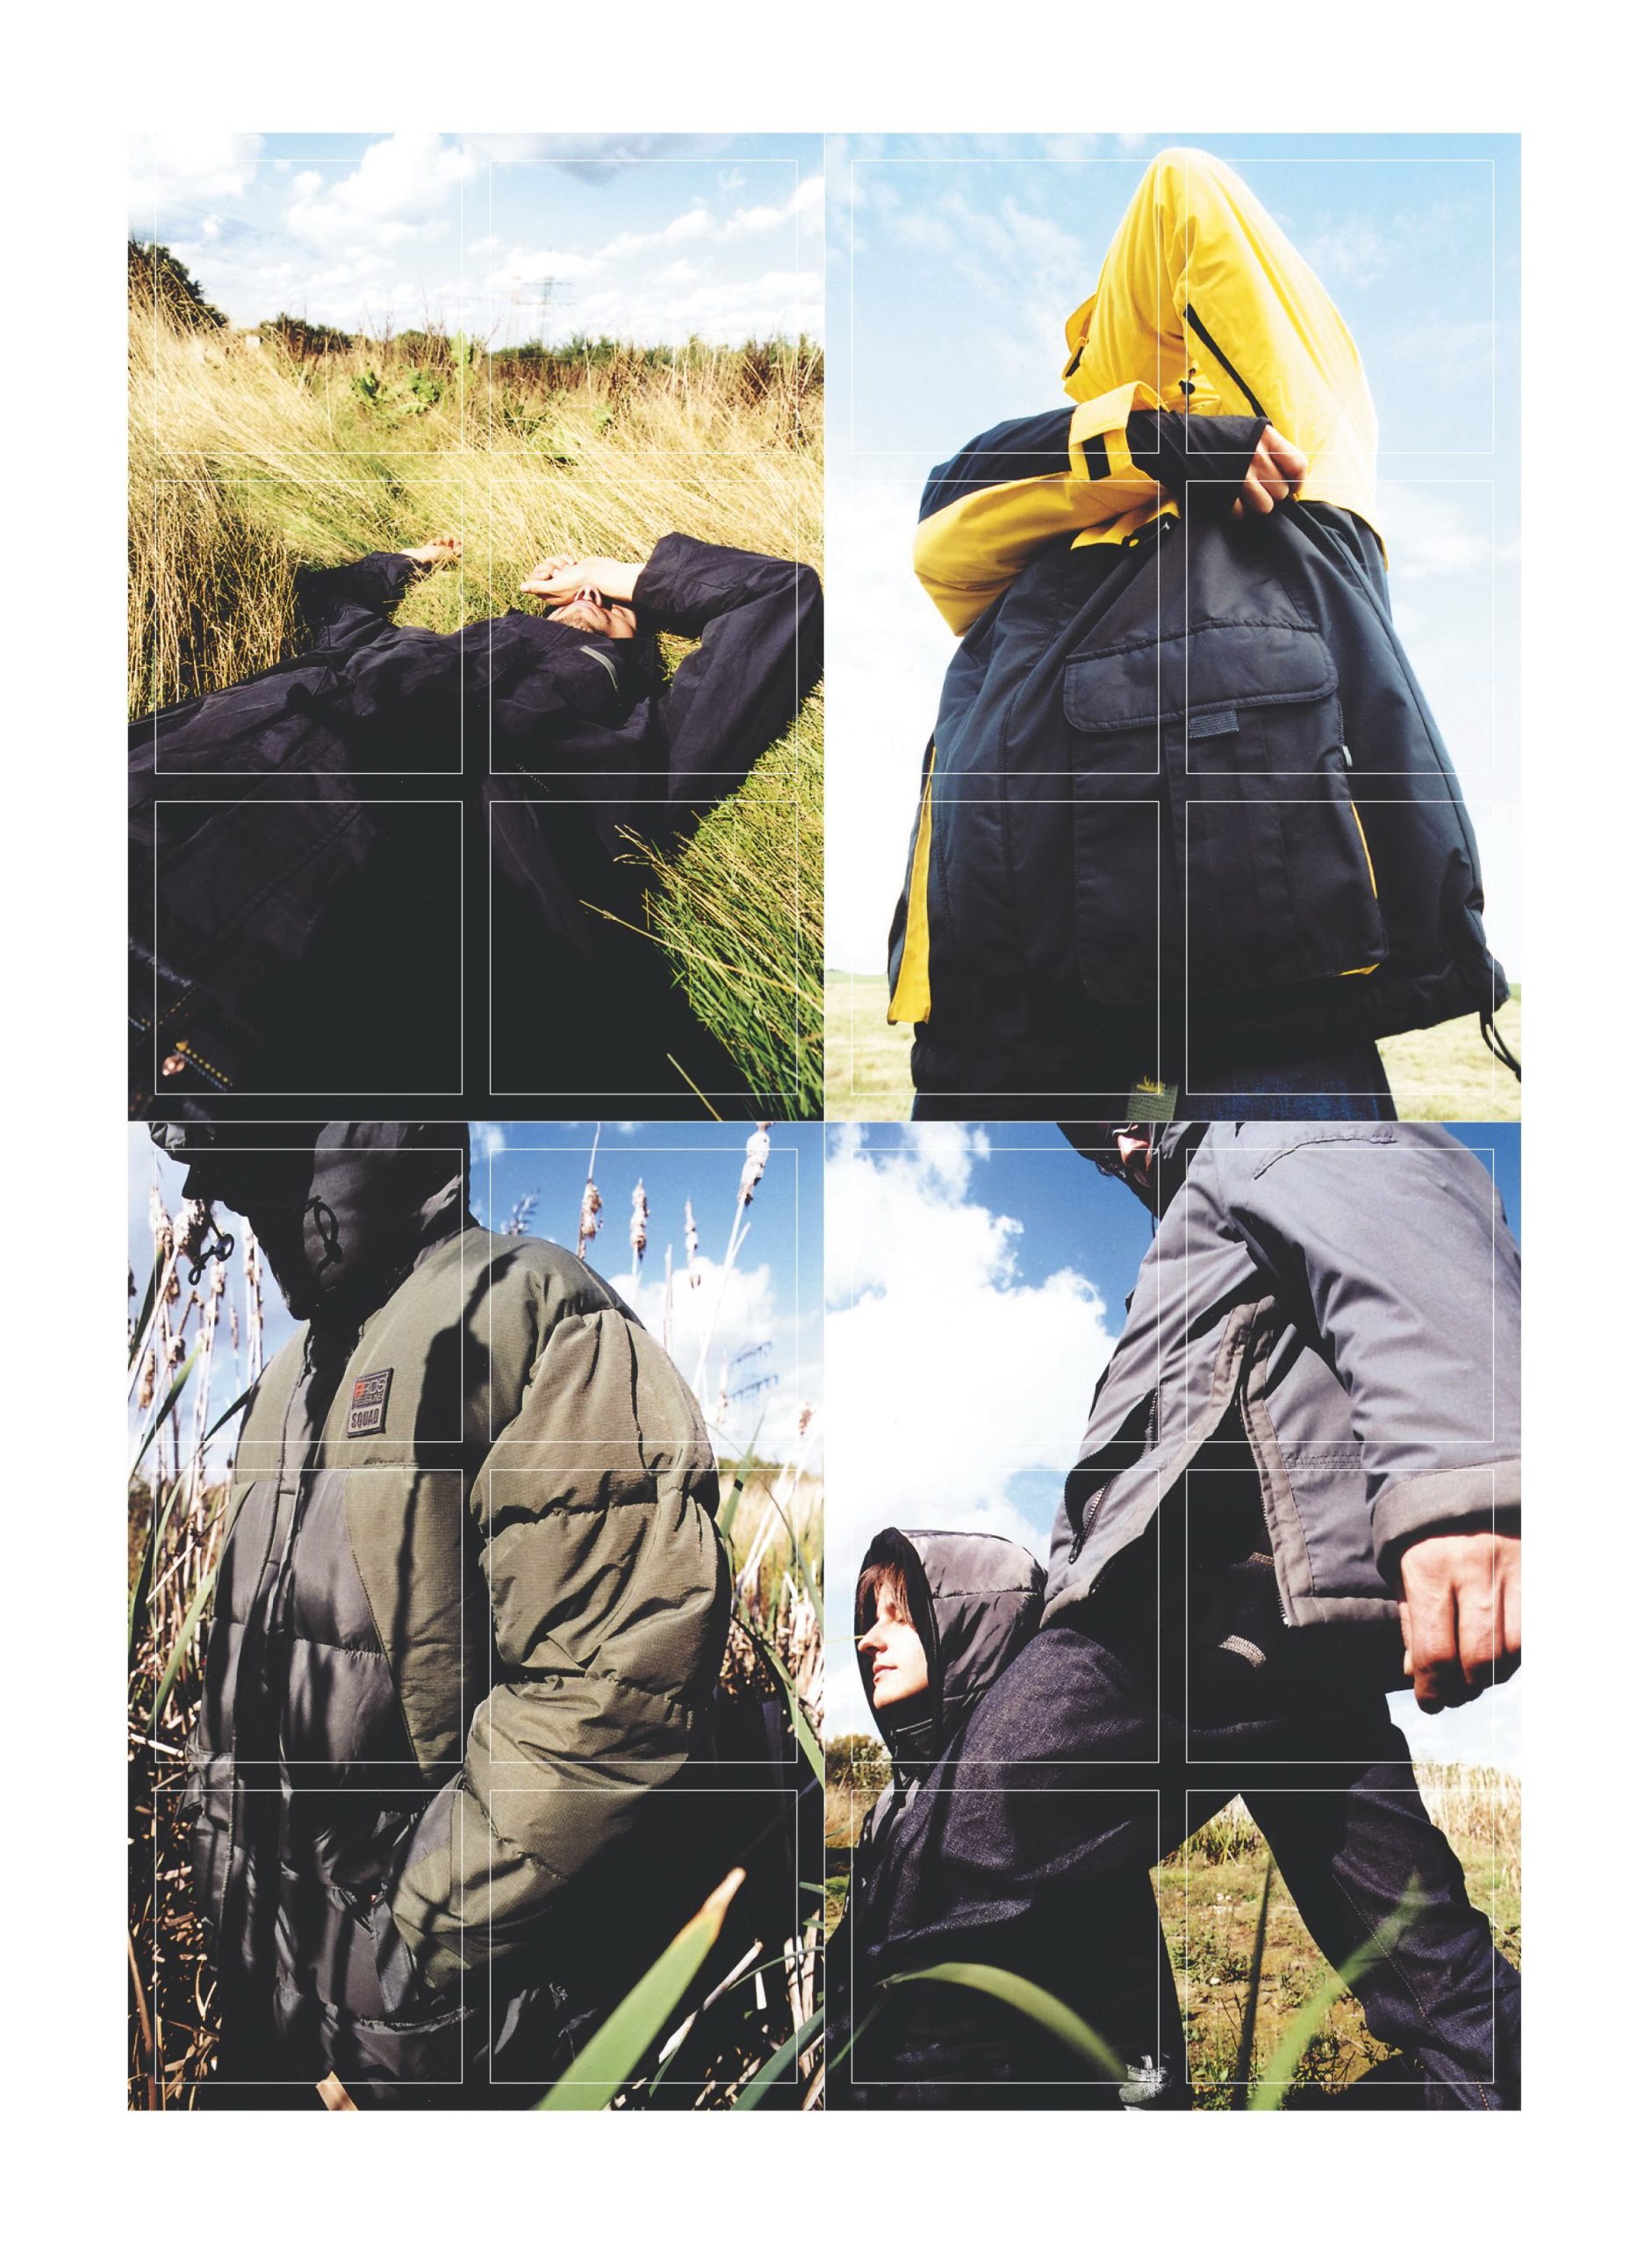 Fashion shooting for Raveline Magazine  people in jackets Vertical outdoors shot.